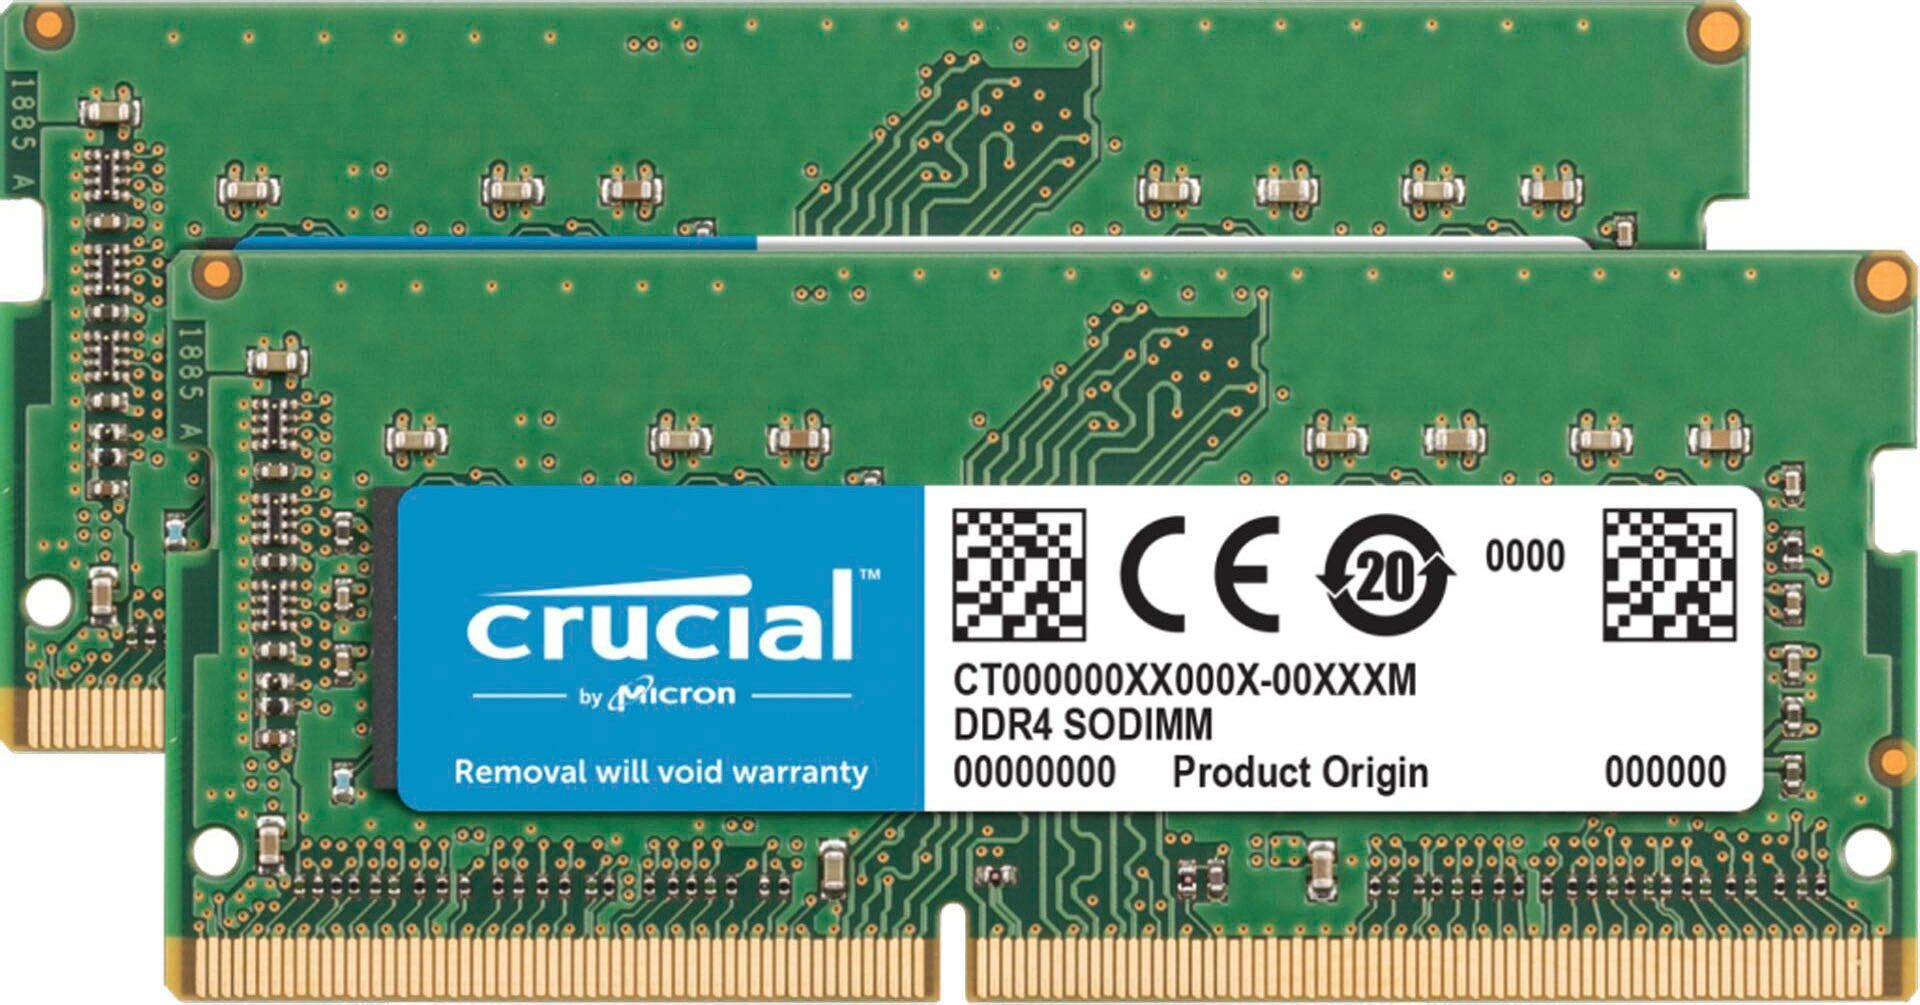 Crucial 64GB DDR4 2666 MT/s Kit 32GBx2 SODIMM 260pin for Mac Laptop-Arbeitsspeicher